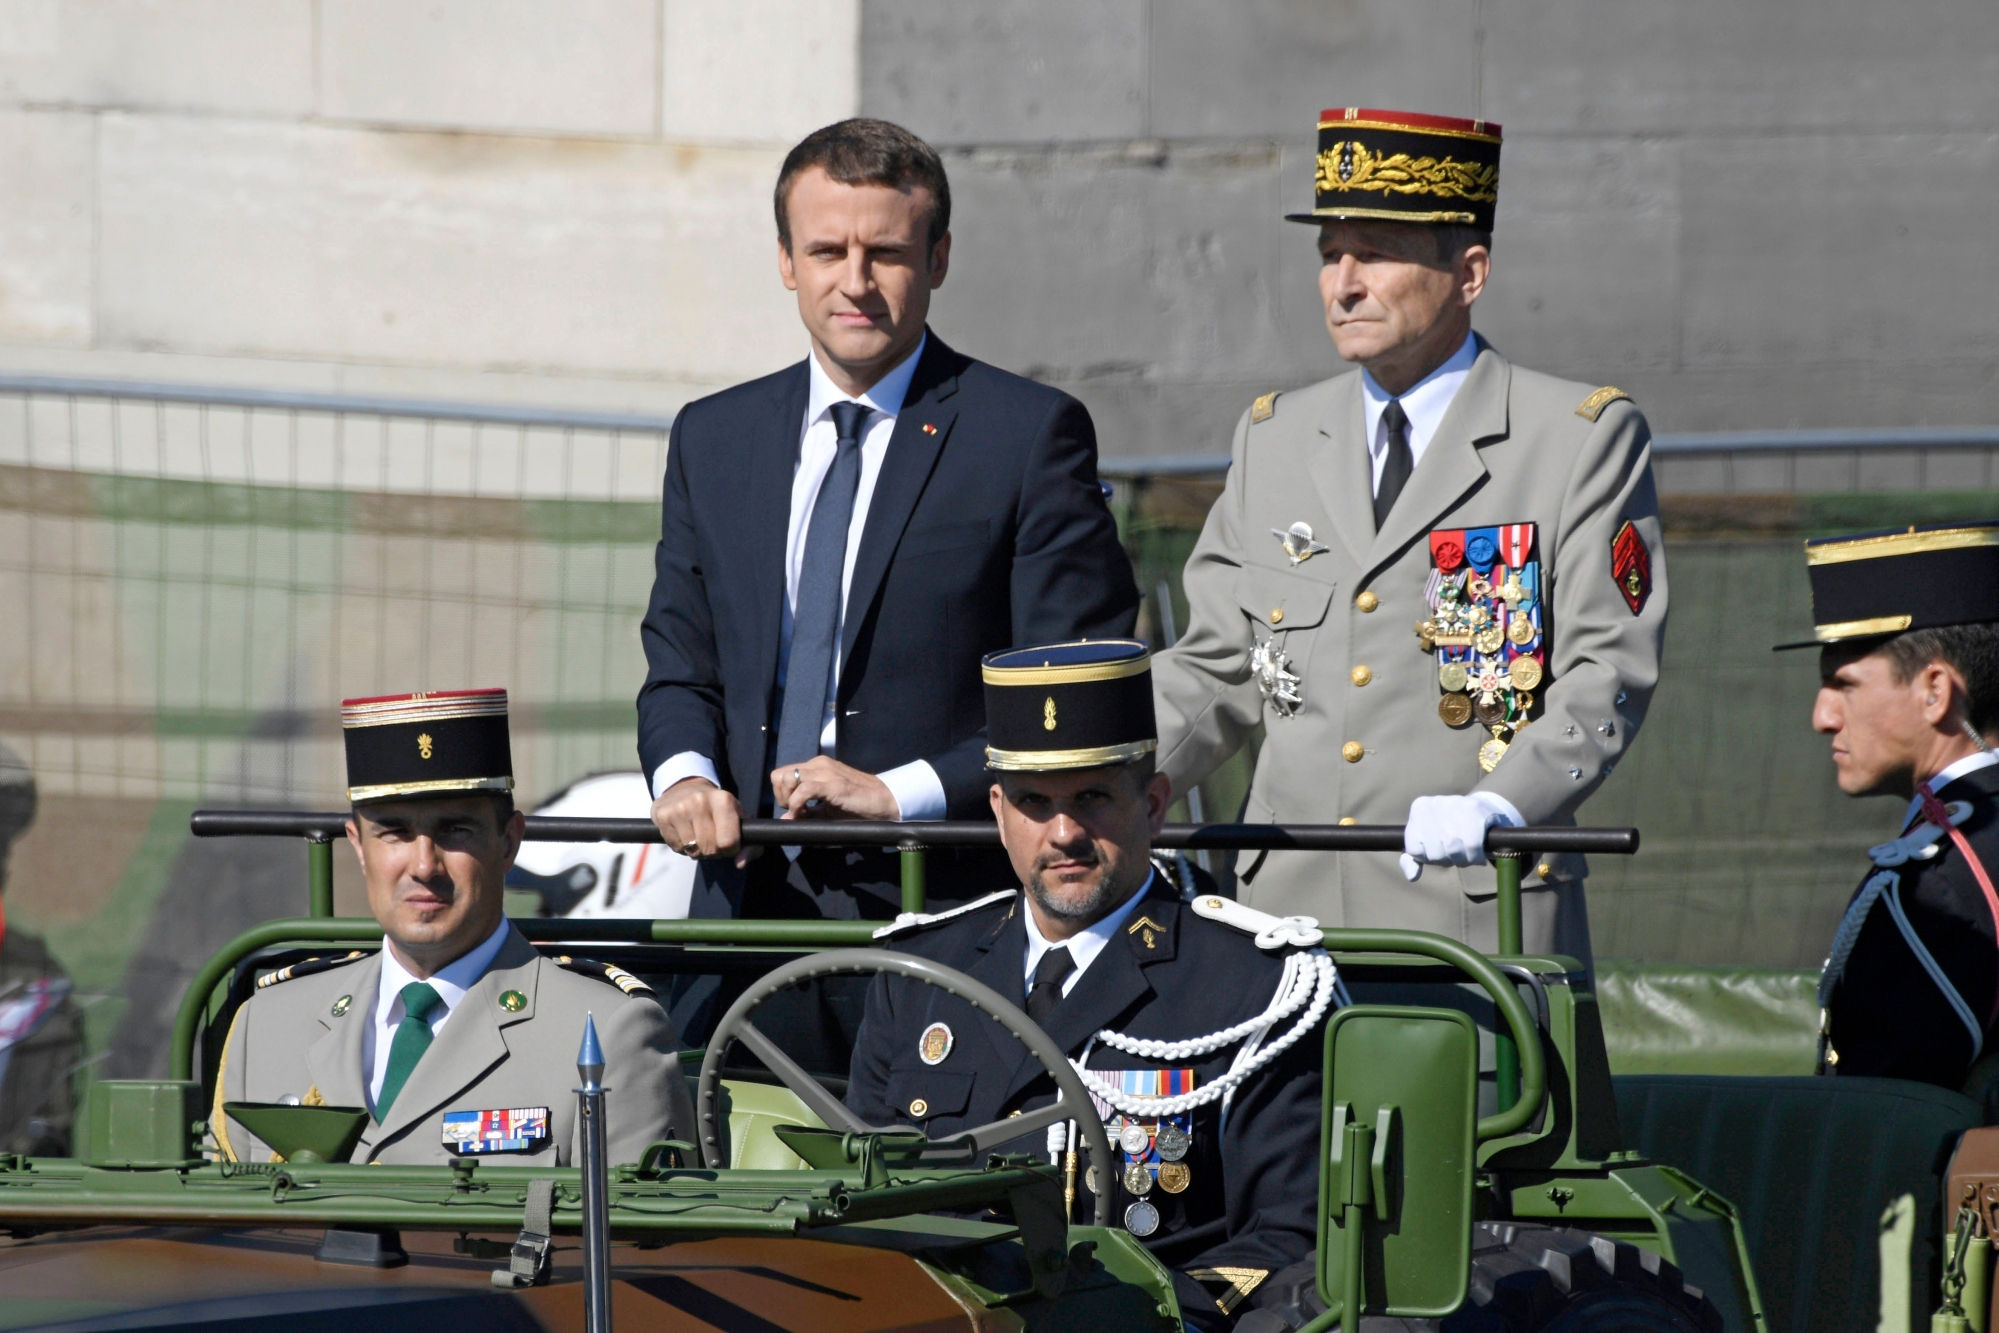 epa06095819 (FILE) - French President Emmanuel Macron (C) and Chief of the Defence Staff, French Army General Pierre de Villiers (R) arrive for the traditional military parade as part of the Bastille Day celebrations in Paris, France, 14 July 2017 (reissued 19 July 2017).  Defense Staff French Army General Pierre de Villiers gave in his resignation to French President Emmanuel Macron on 19 July 2017.  EPA/JULIEN DE ROSA (FILE) FRANCE MACRON DE VILLIERS